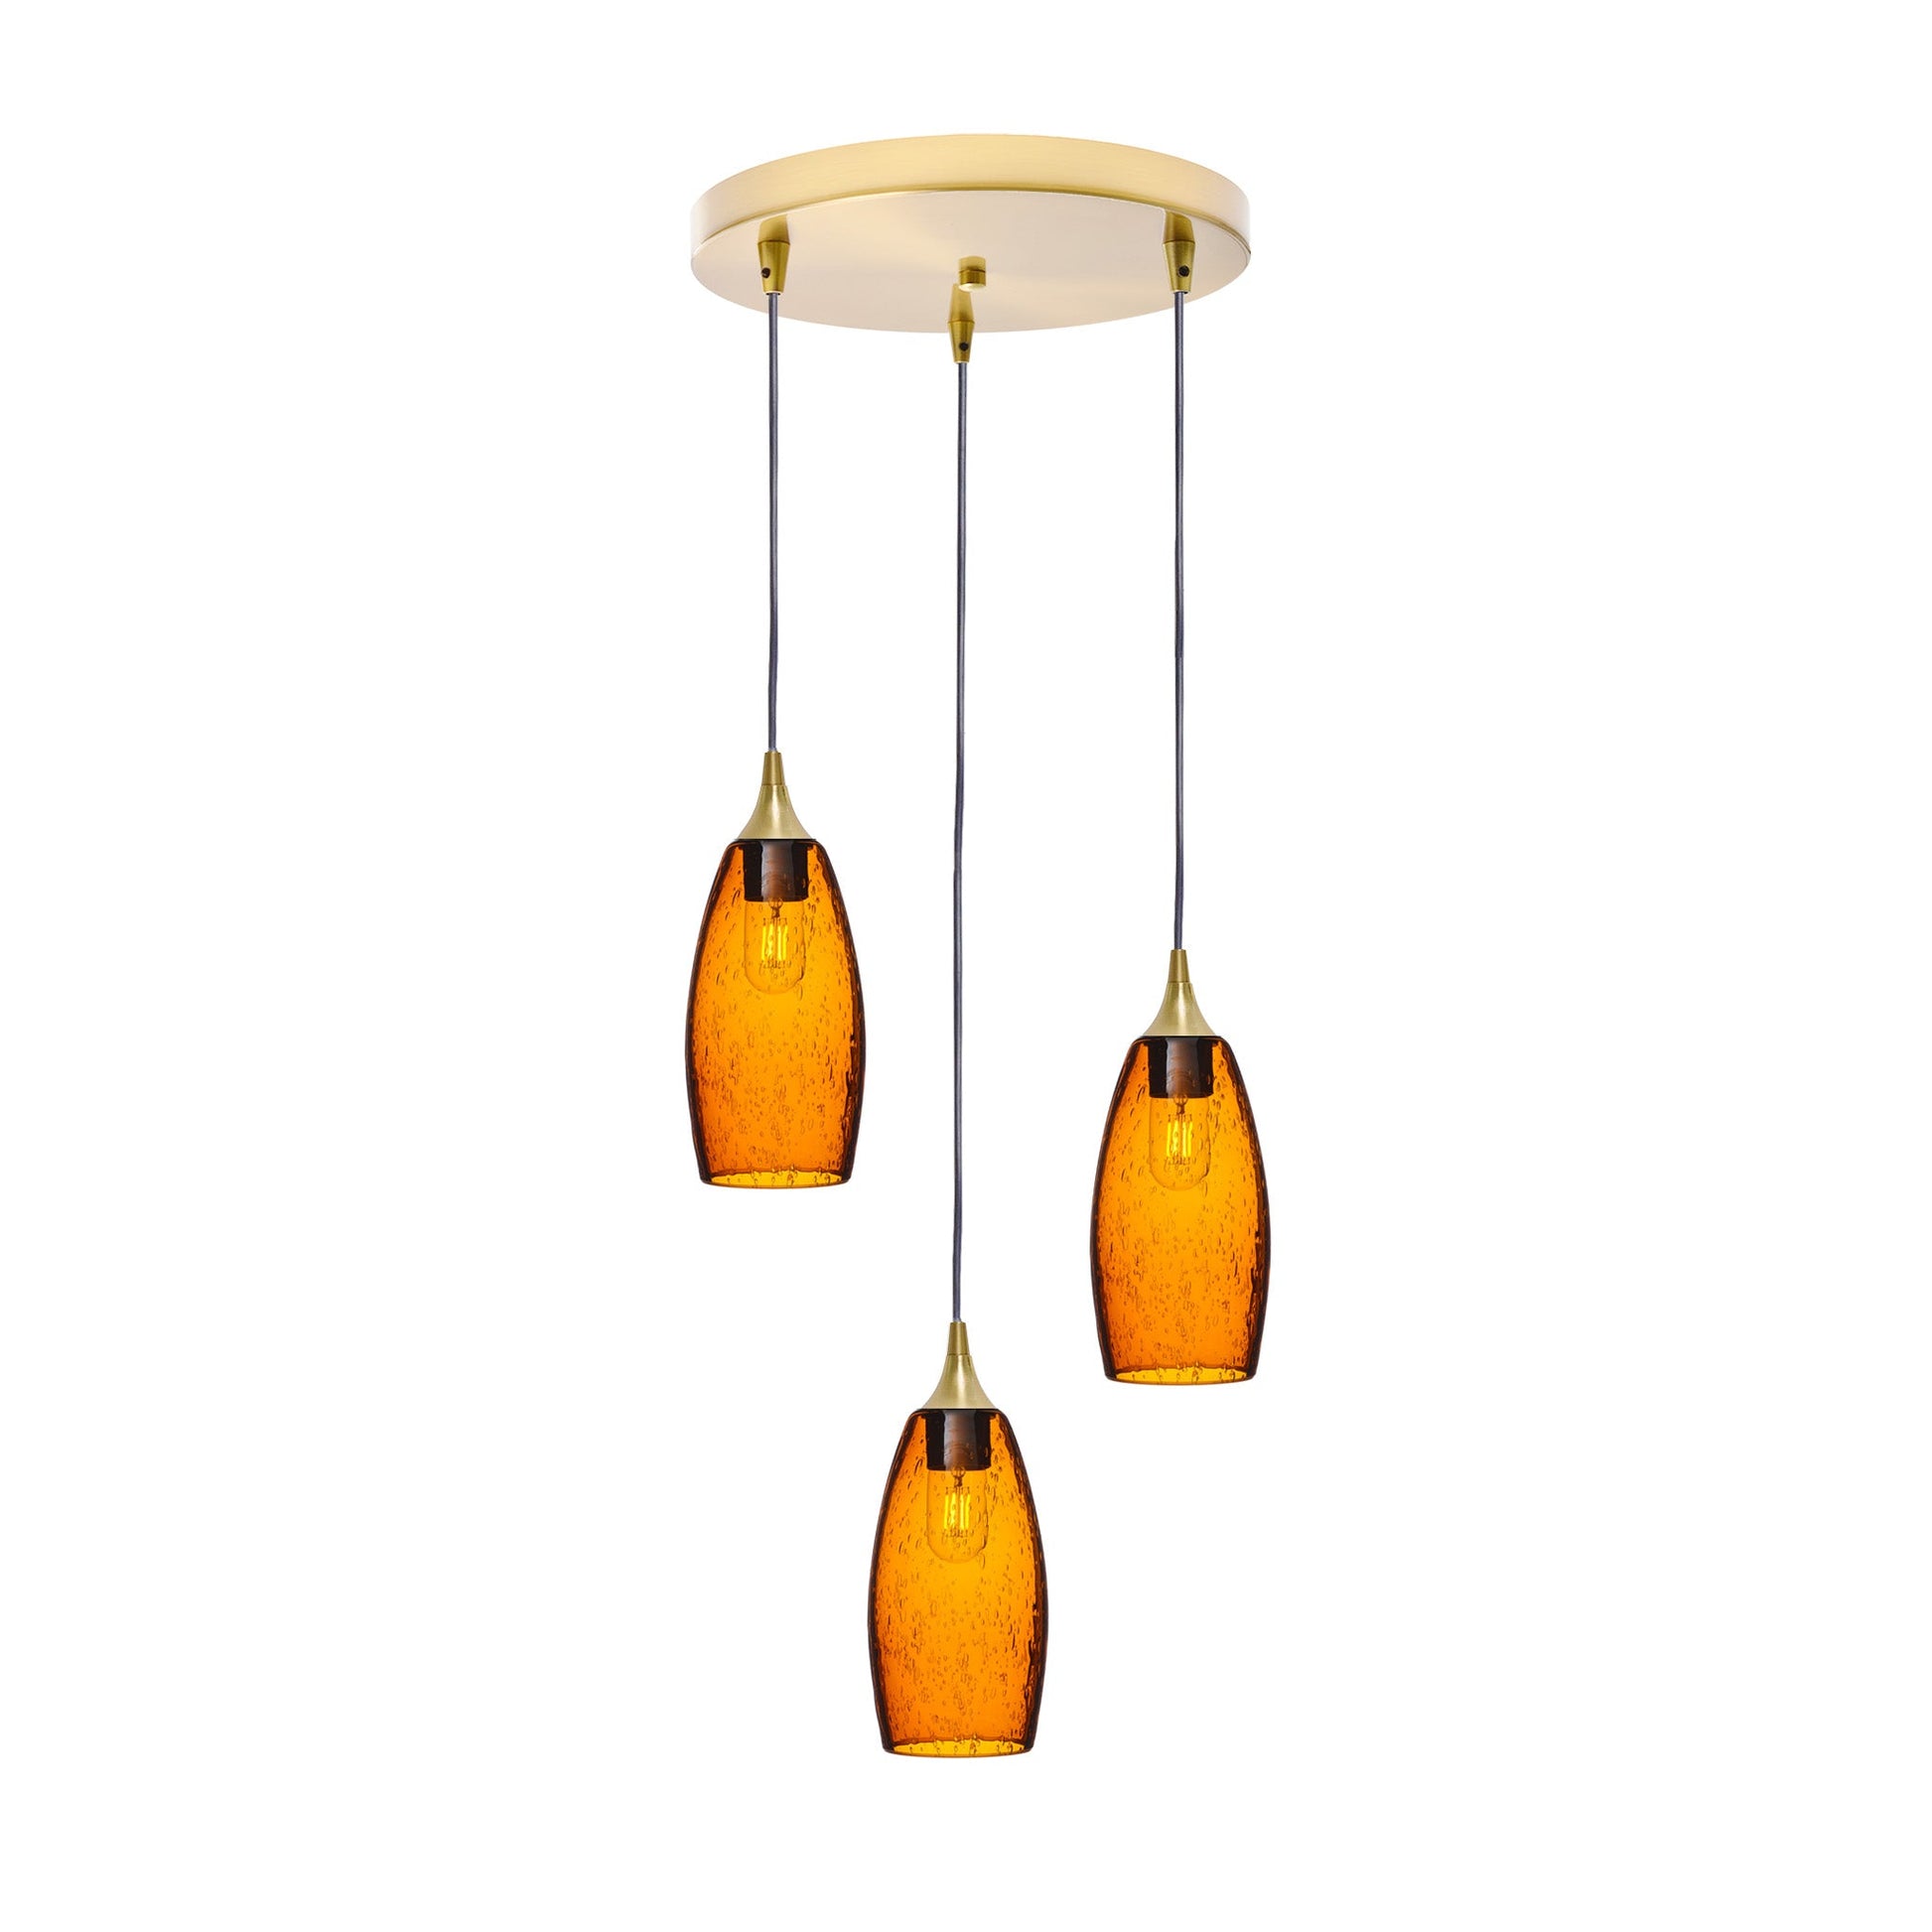 147 Lunar: 3 Pendant Cascade Chandelier-Glass-Bicycle Glass Co - Hotshop-Golden Amber-Polished Brass-Bicycle Glass Co